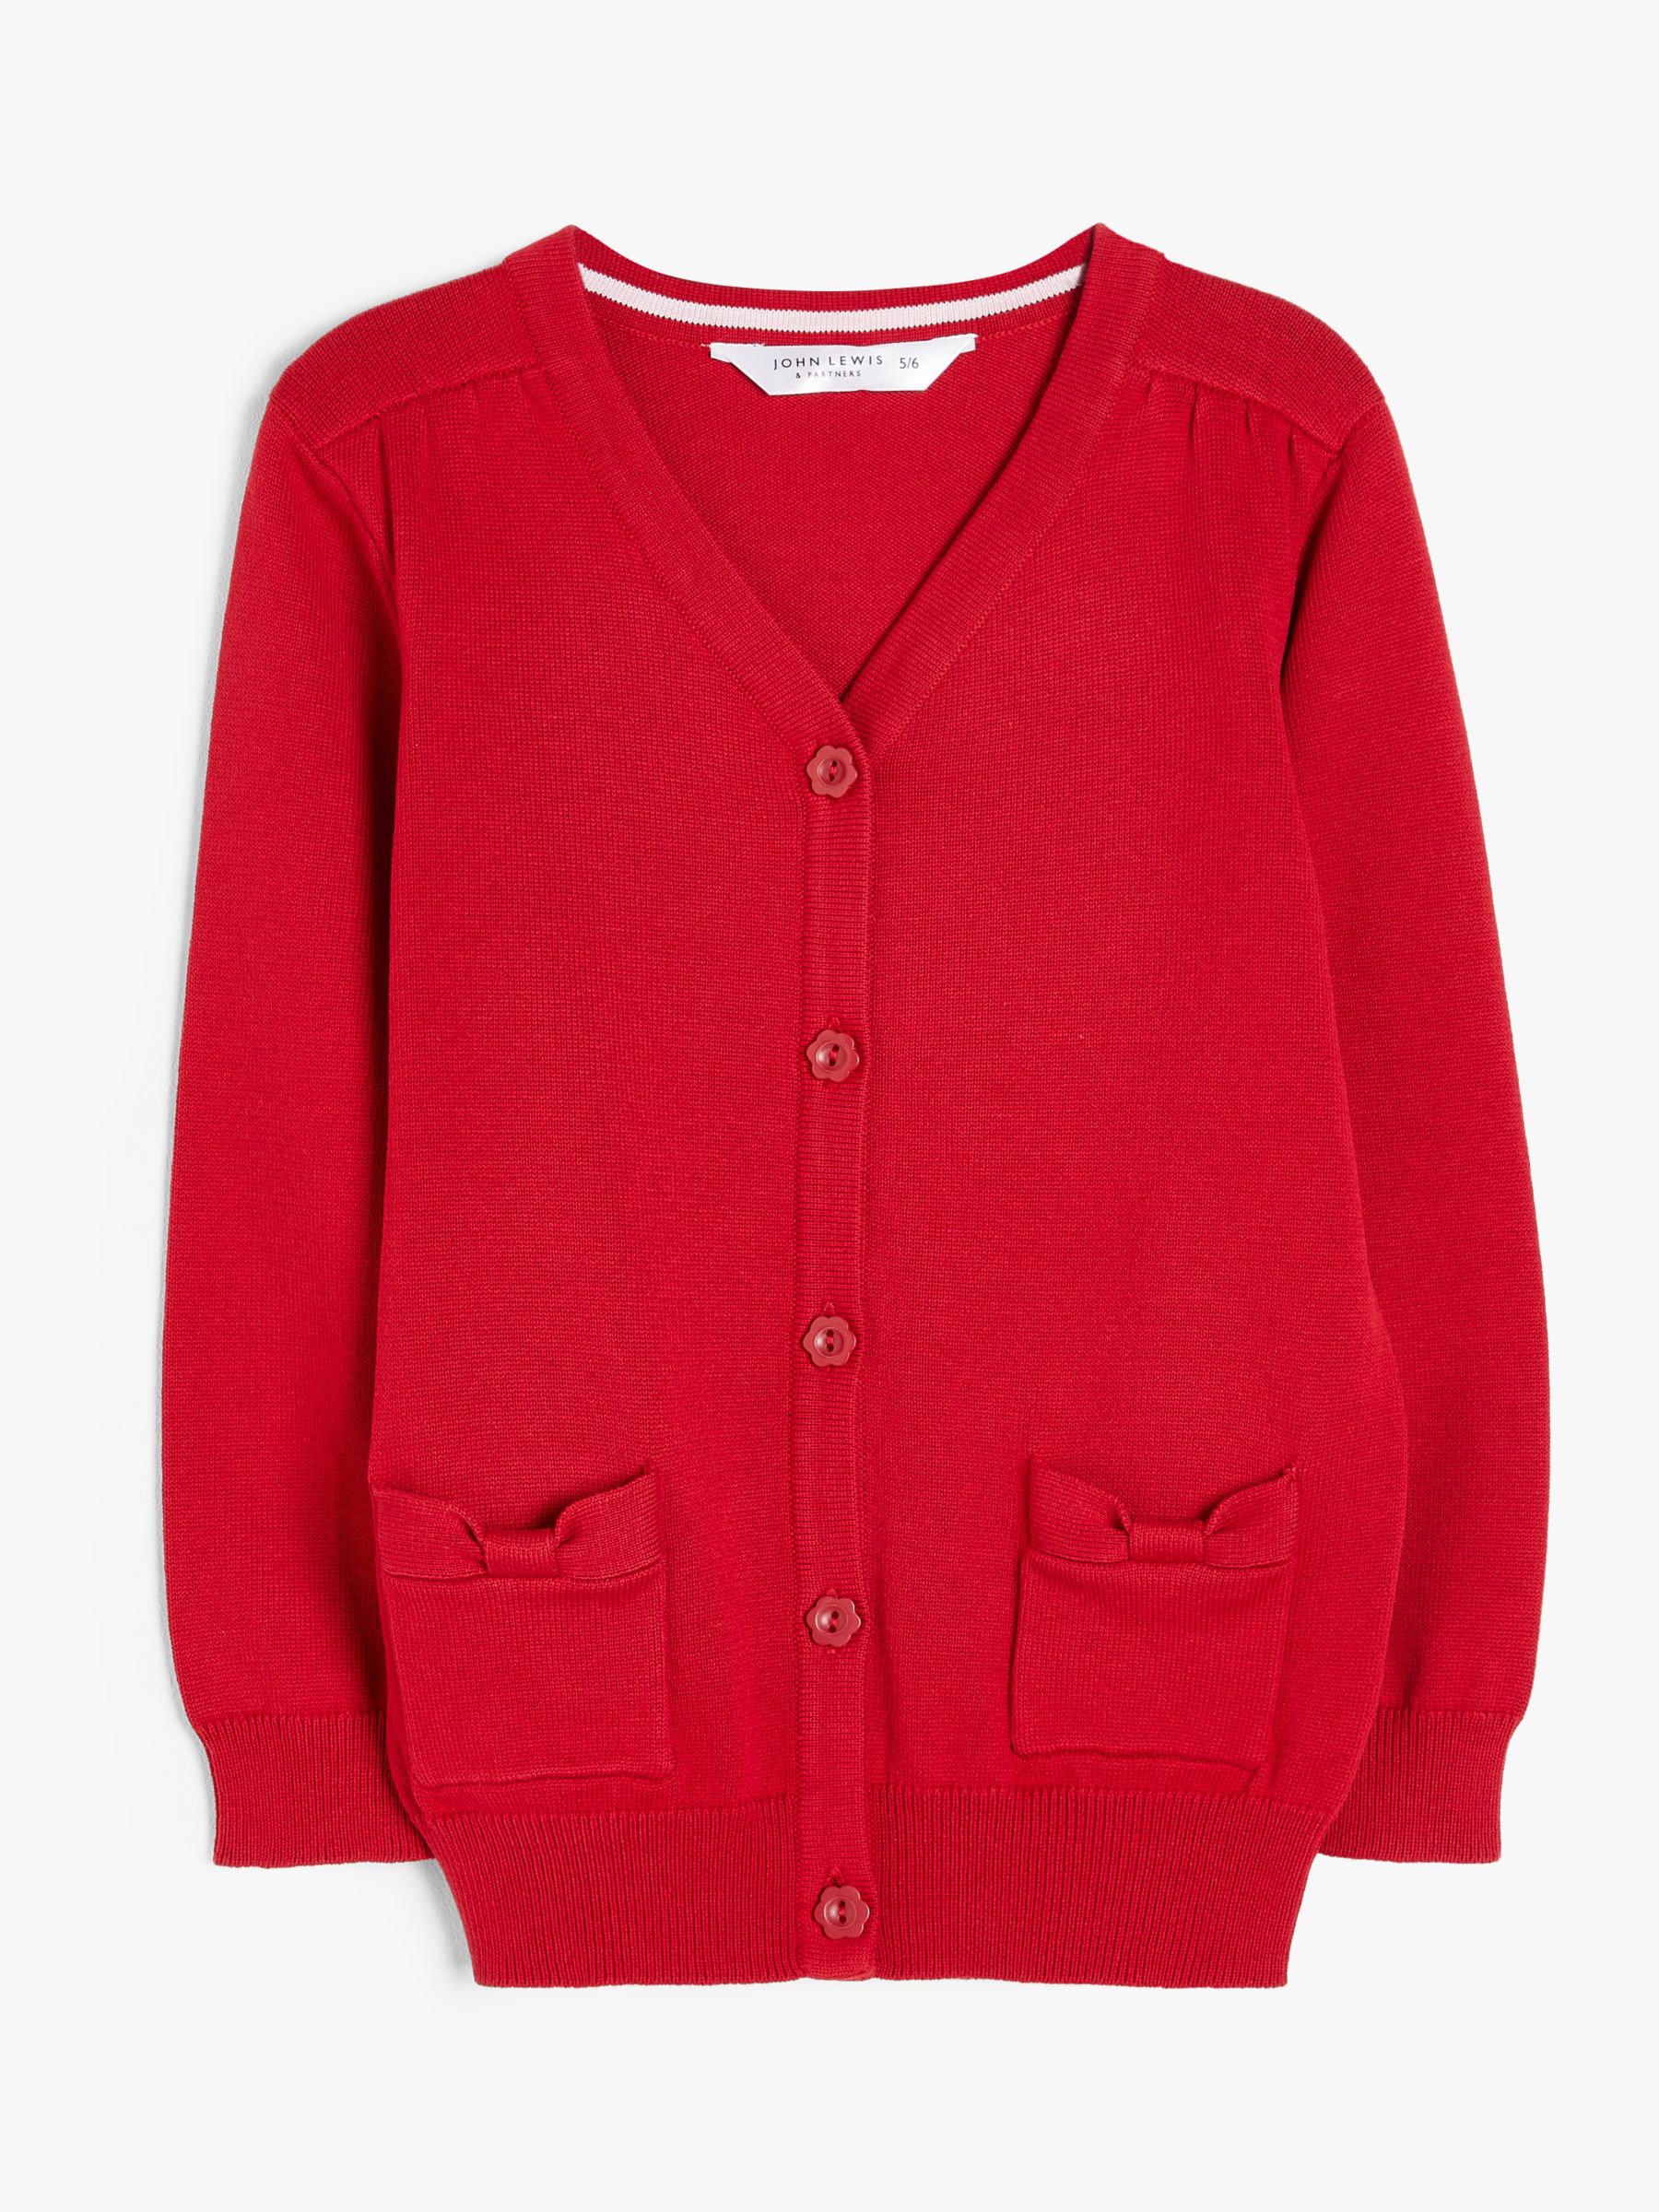 John Lewis Girls' Cotton Double Pocket Easy Care Cardigan, Red, 3-4 years